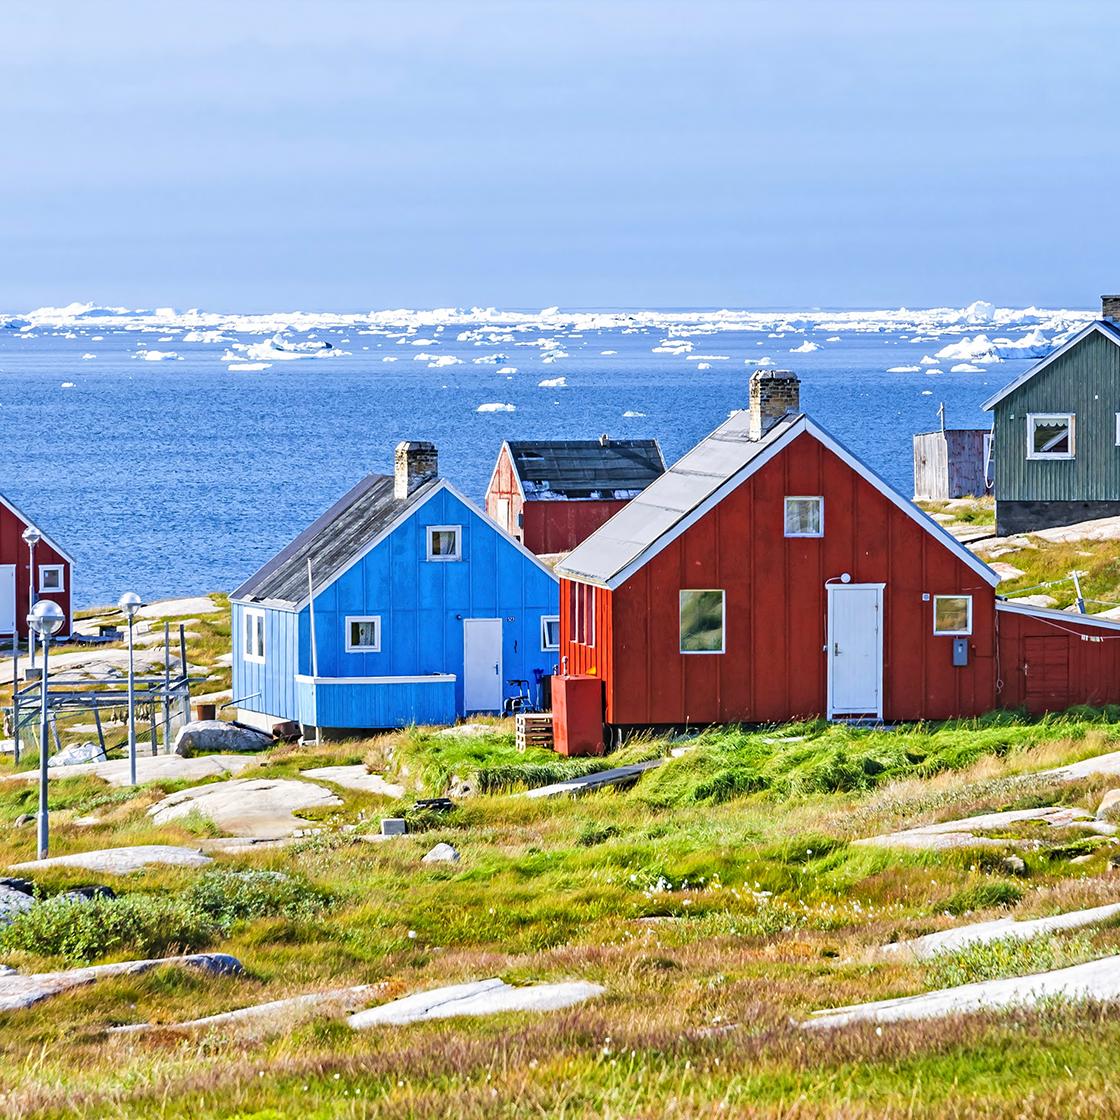 See Greenland on an Intrepid Travel Tour